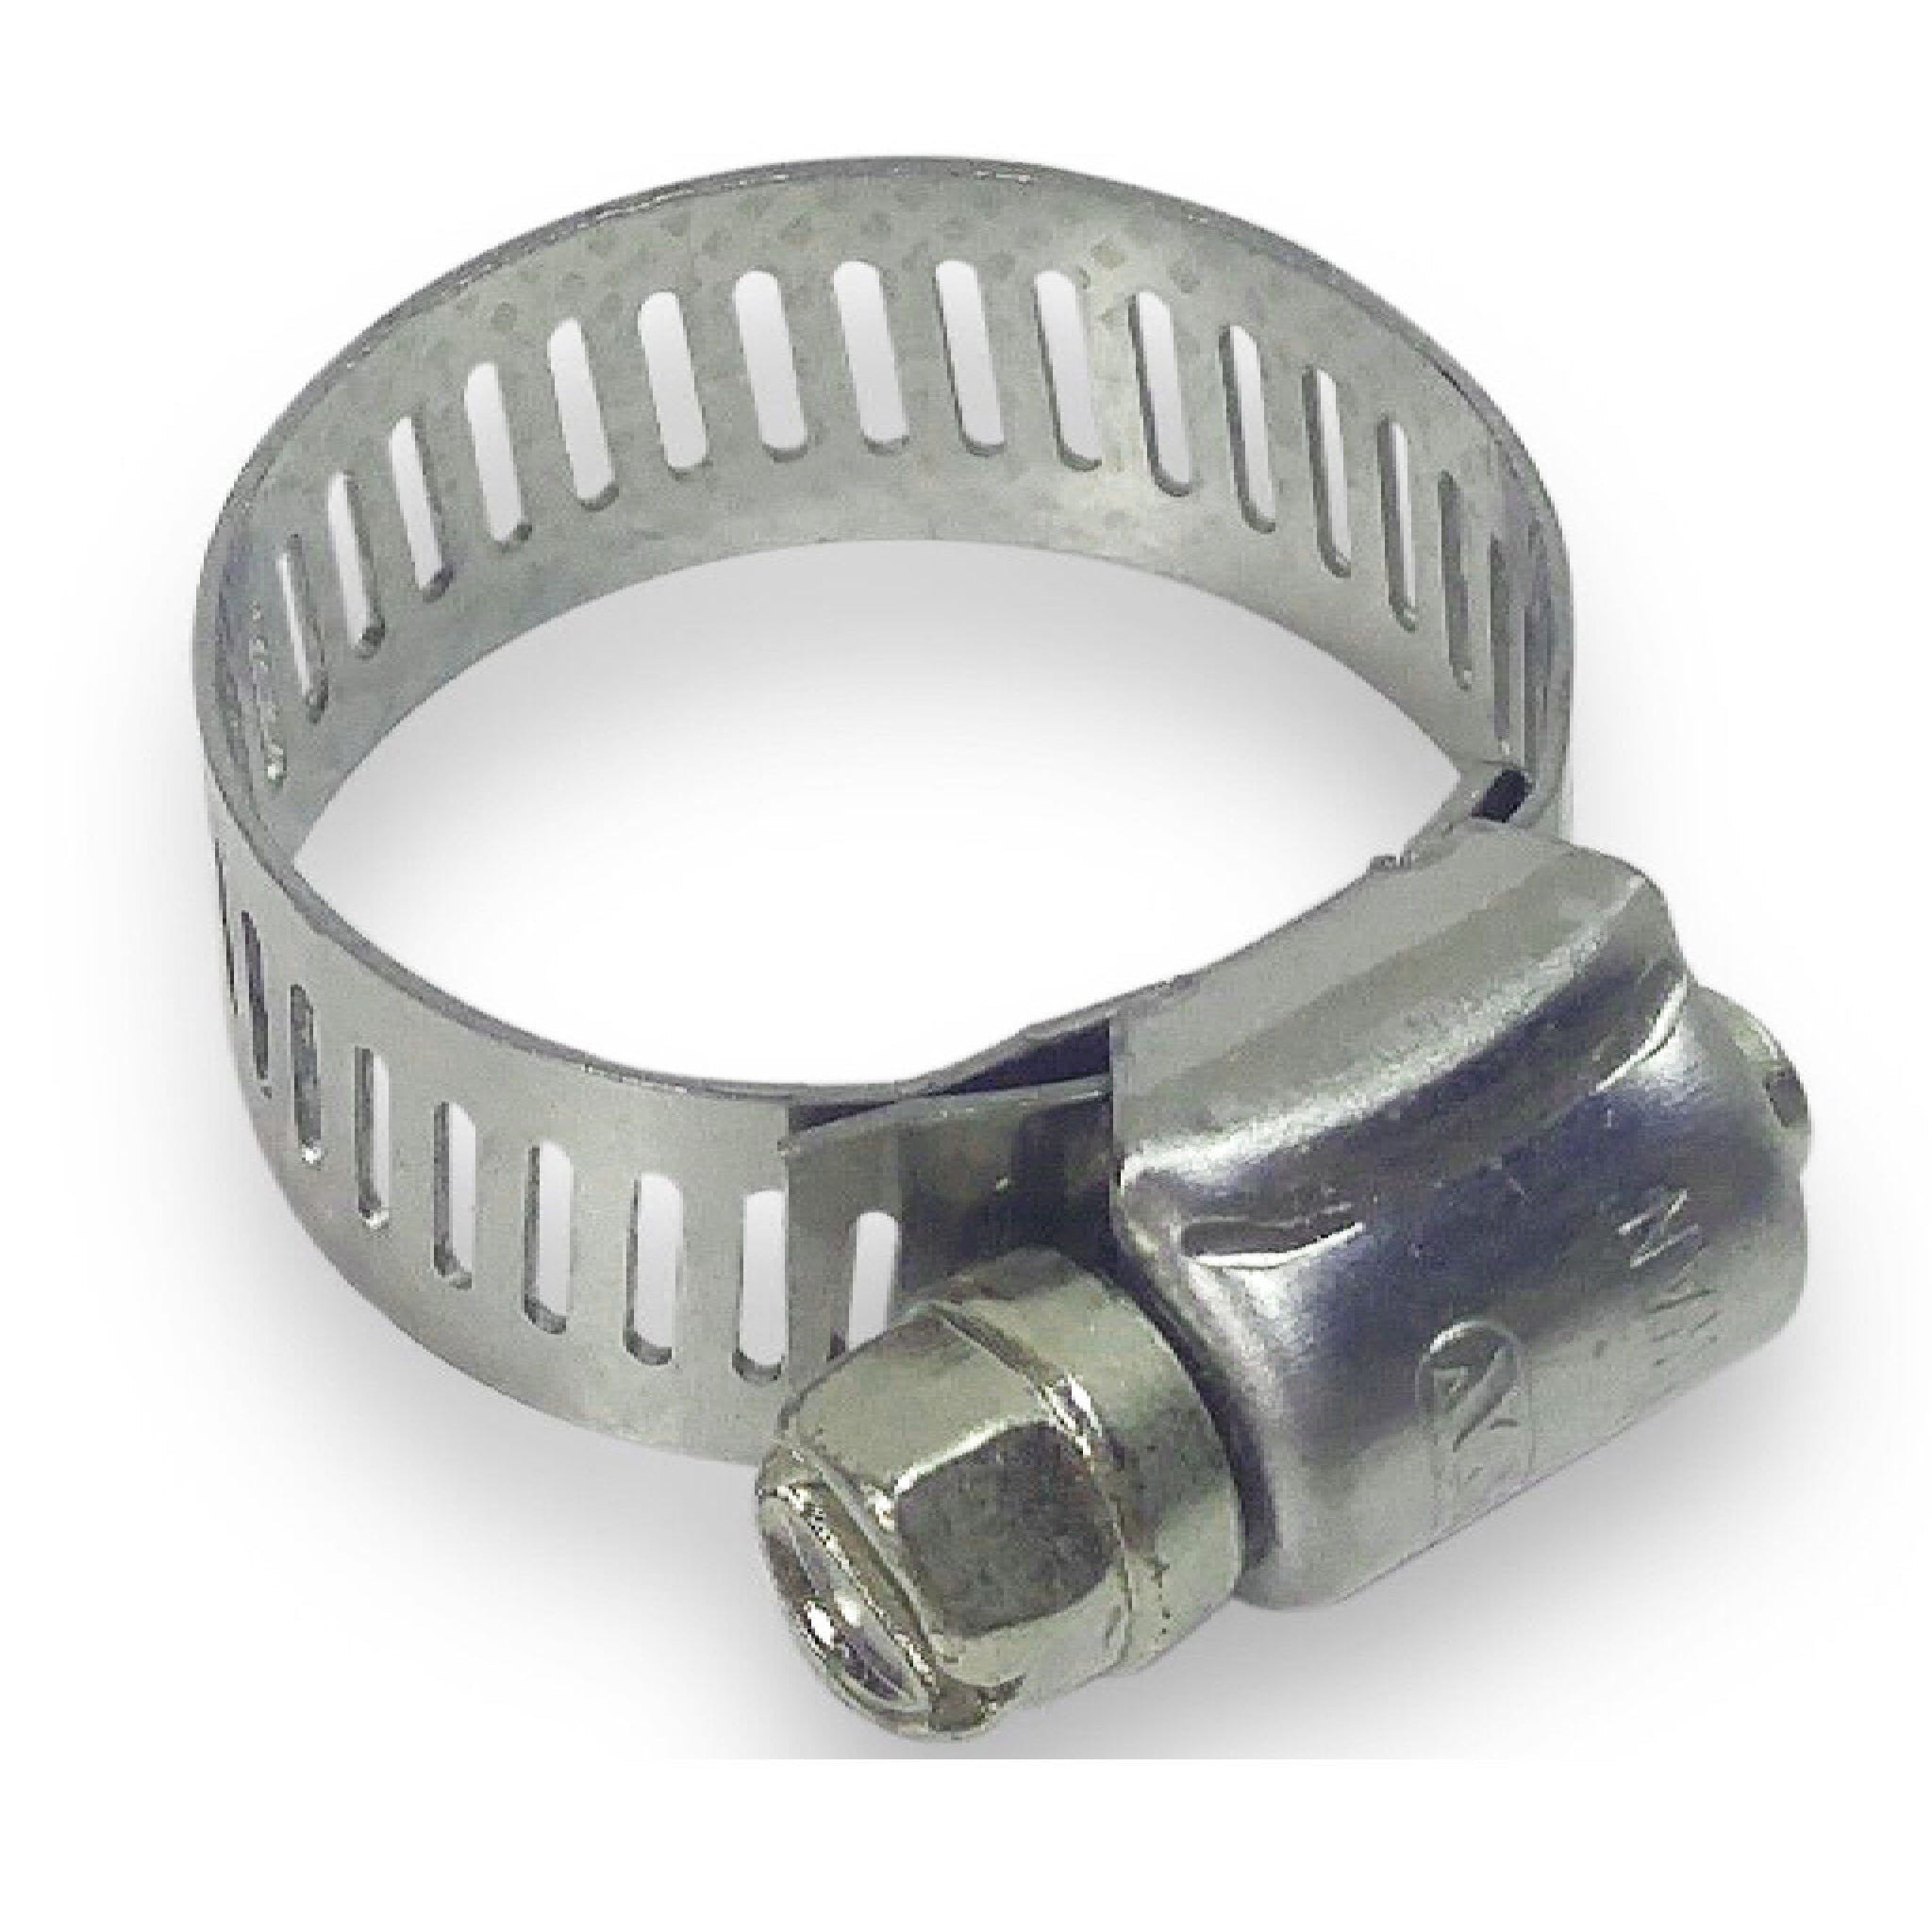 #6 7/16" to 25/32" Worm Gear Hose Clamp. 1/2" Wide band. Slotted 5/16" Hex head zinc plated carbon steel 10 pack